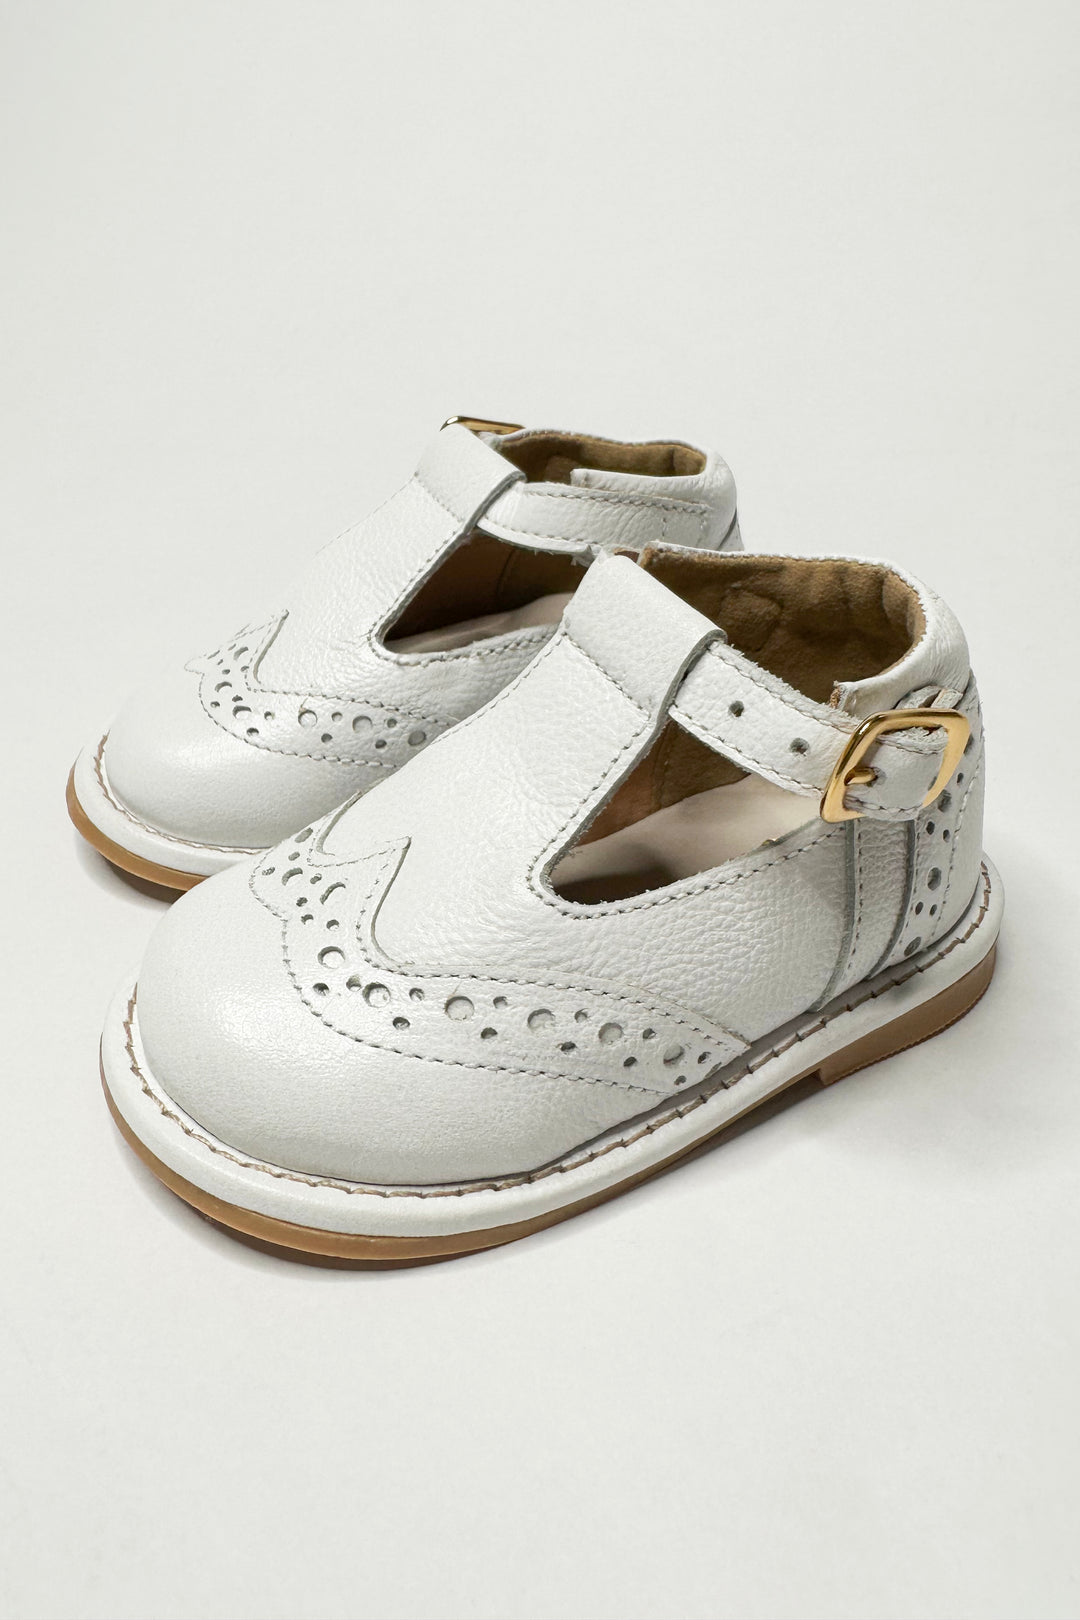 Ananás Petit "Woody" White Leather Shoes | Millie and John